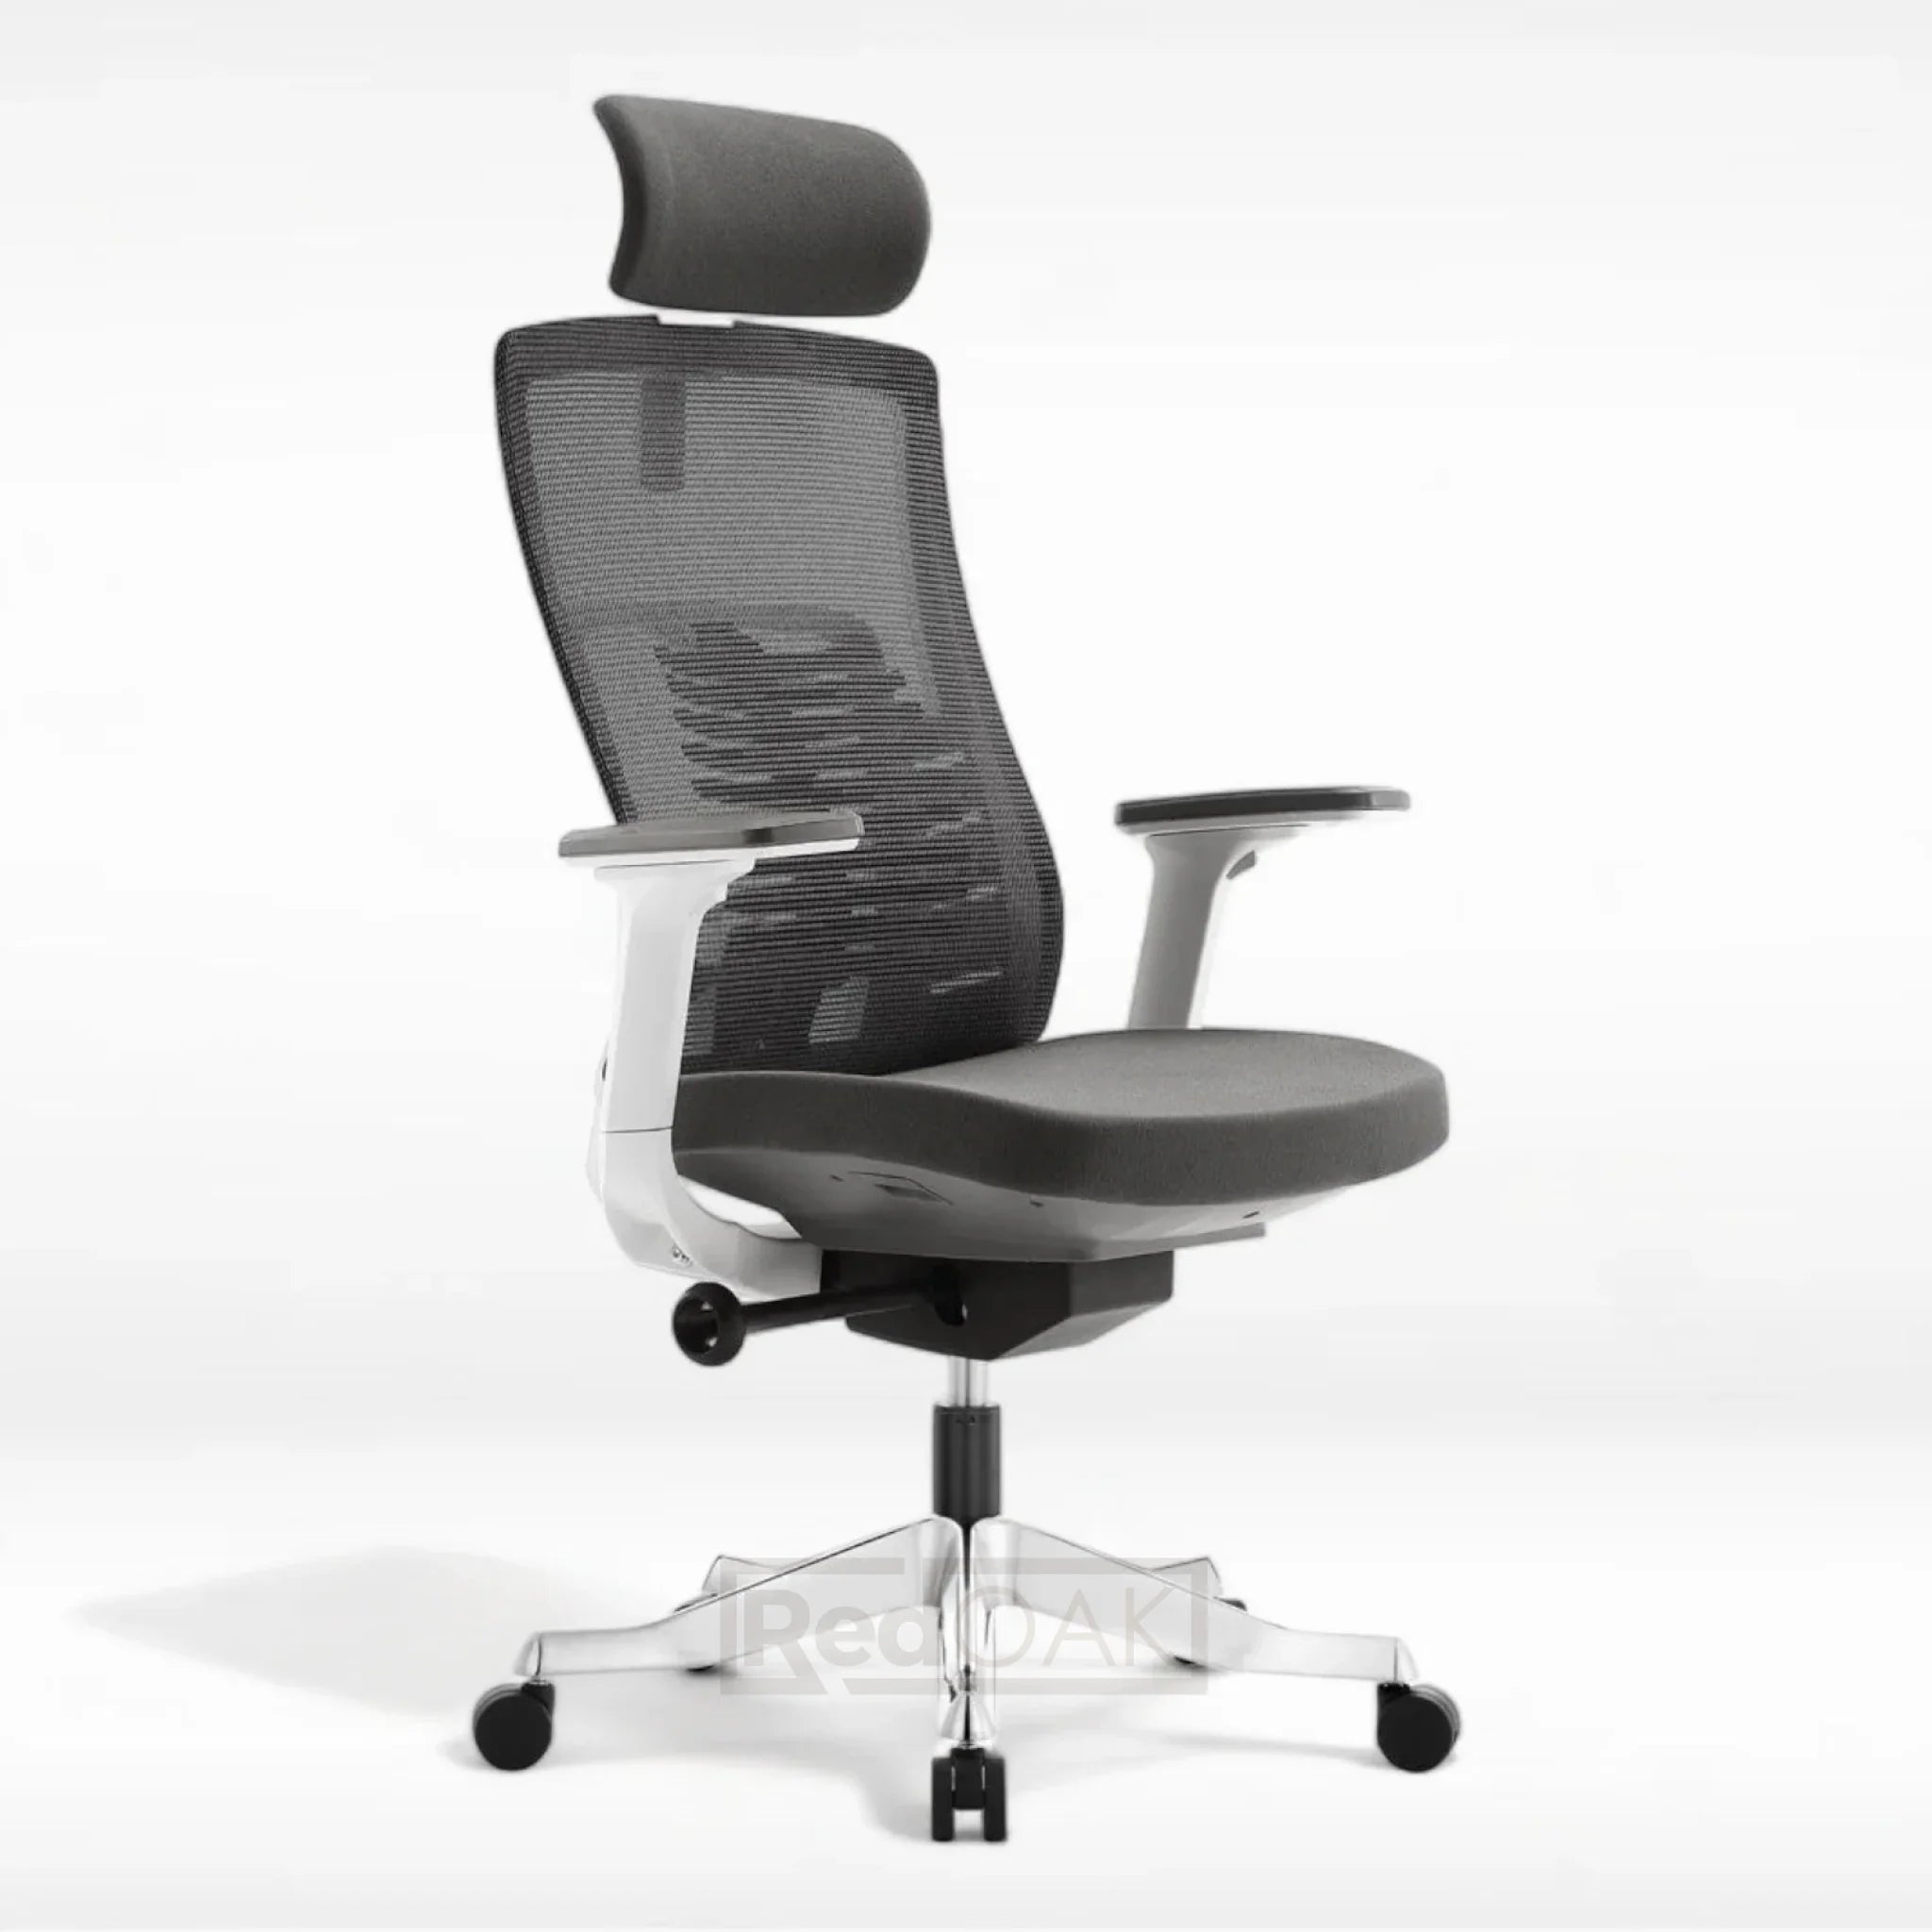 Inspiron White (Cushion Seat) High Back (With Headrest) Executive Chair